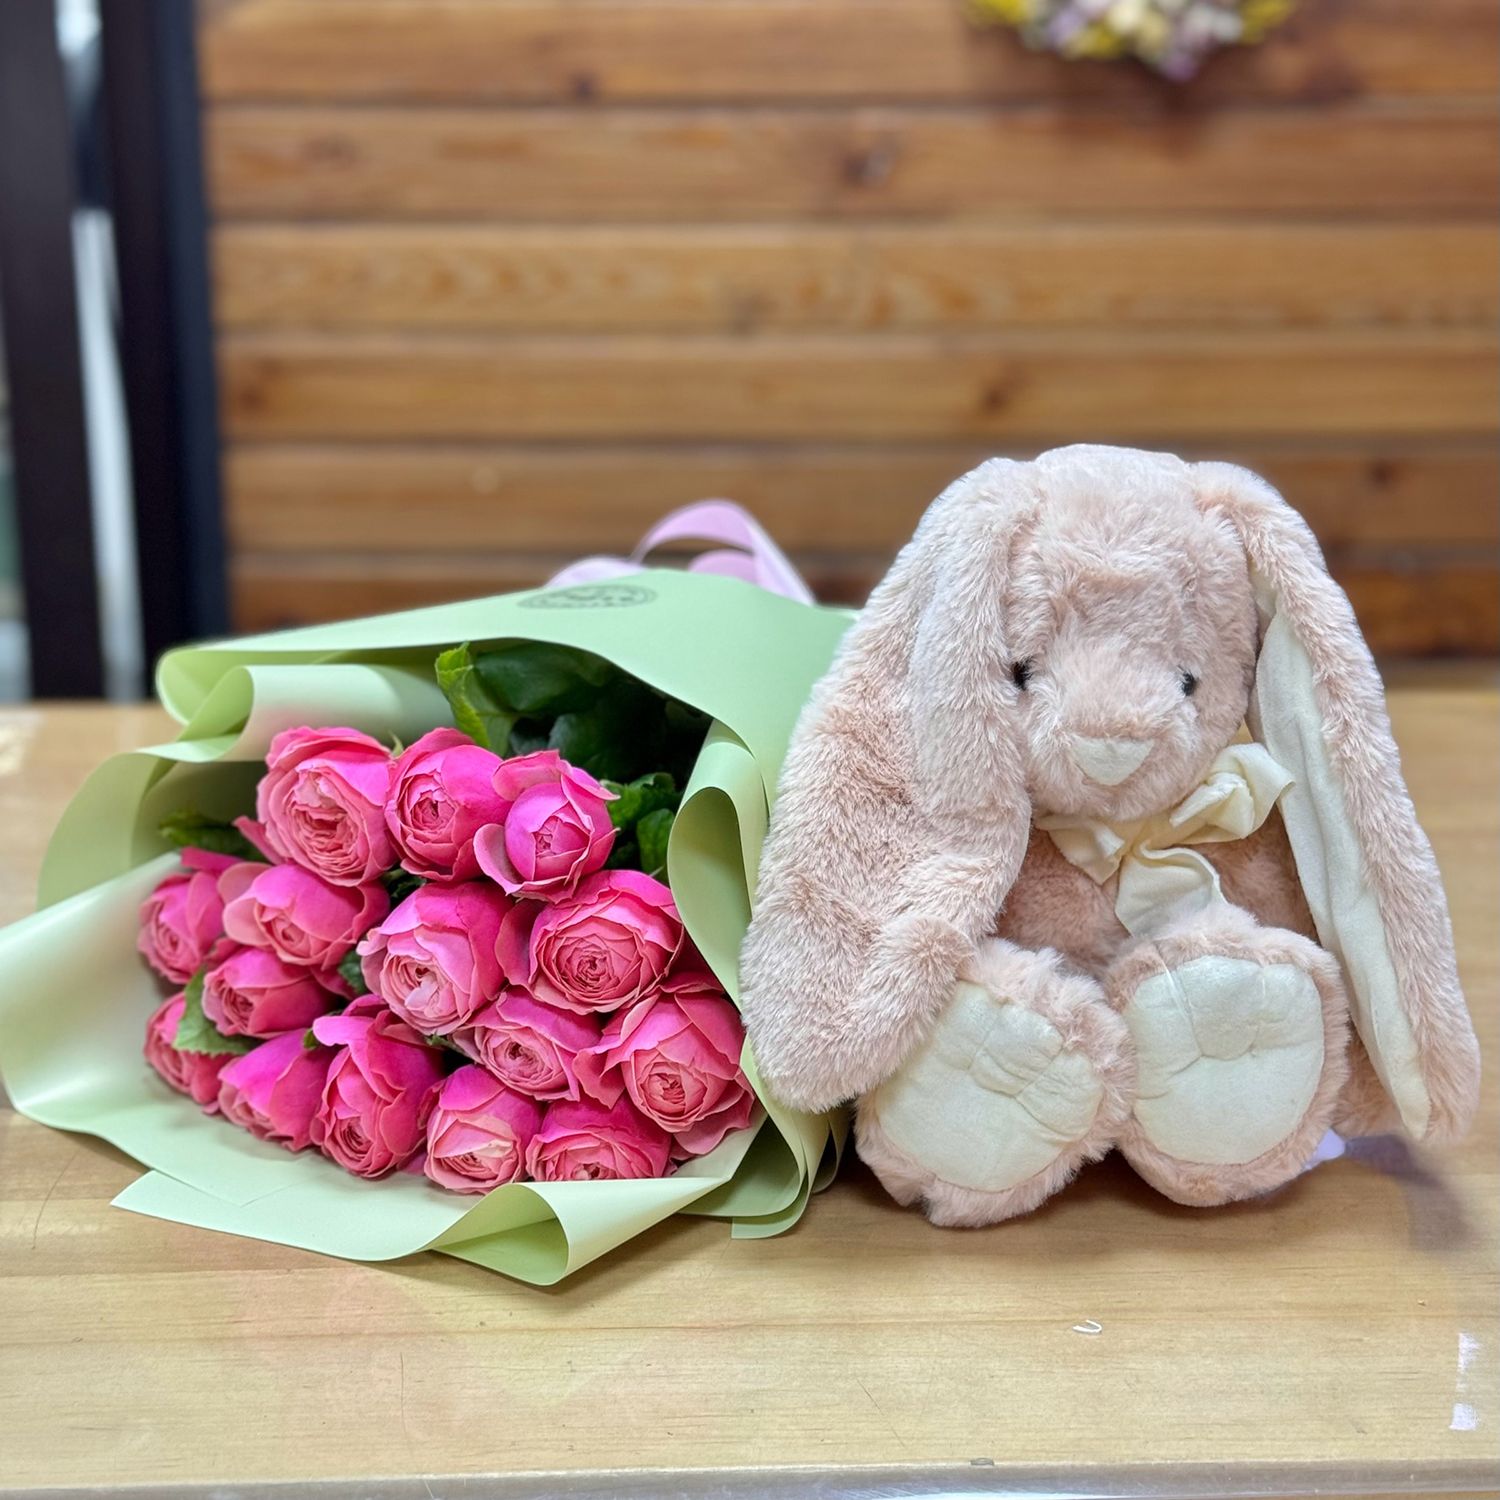 Pink roses and a bunny Ragusa